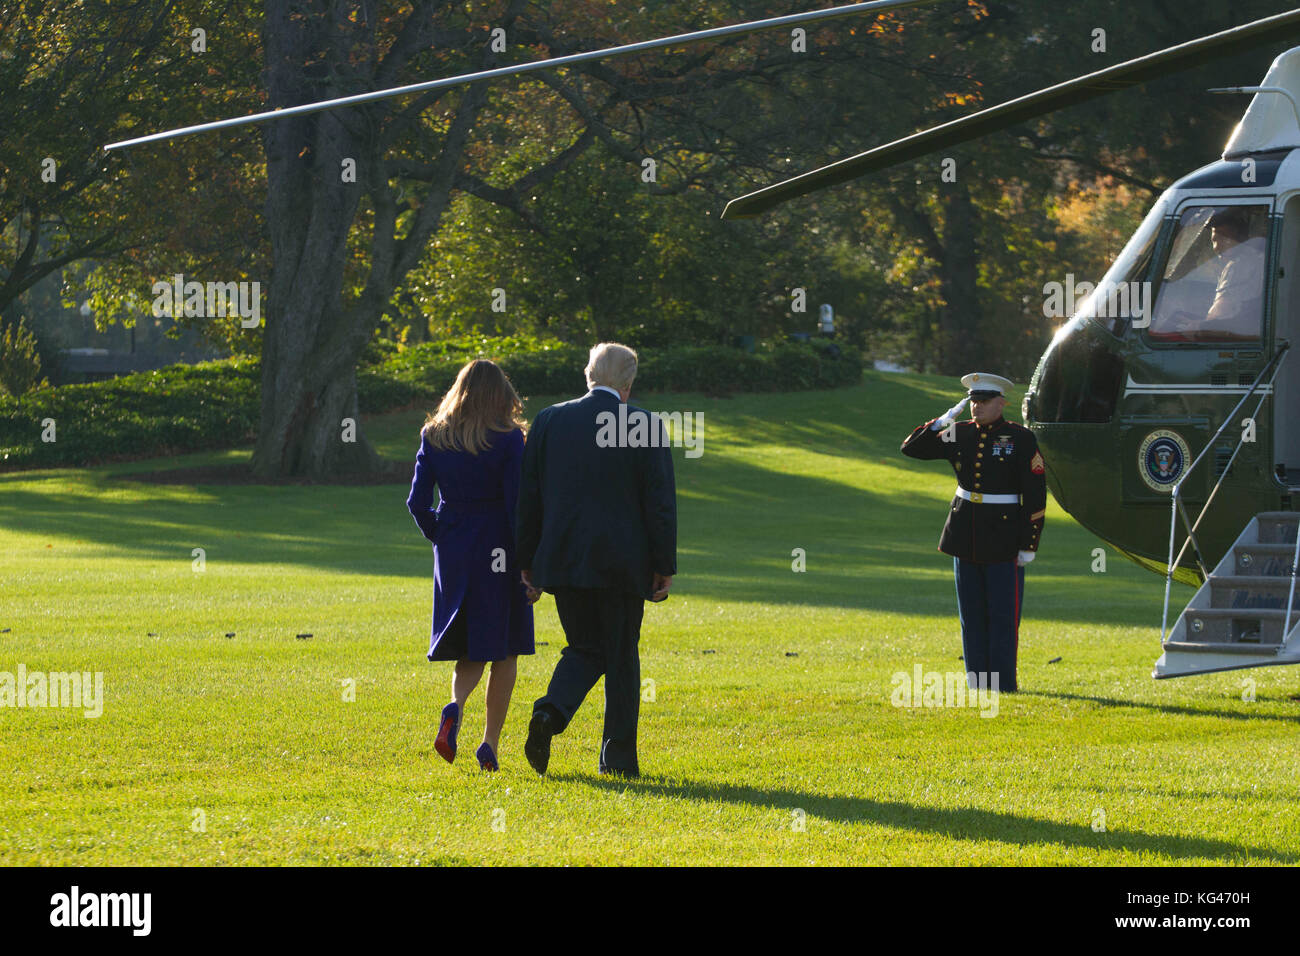 Washington, USA. 3rd Nov, 2017. President Donald Trump and first lady Melania Trump depart the White House for an 11-day, 5-nation trip to Asia, Friday, November 3, 2017. Credit: Michael Candelori/Alamy Live News Stock Photo